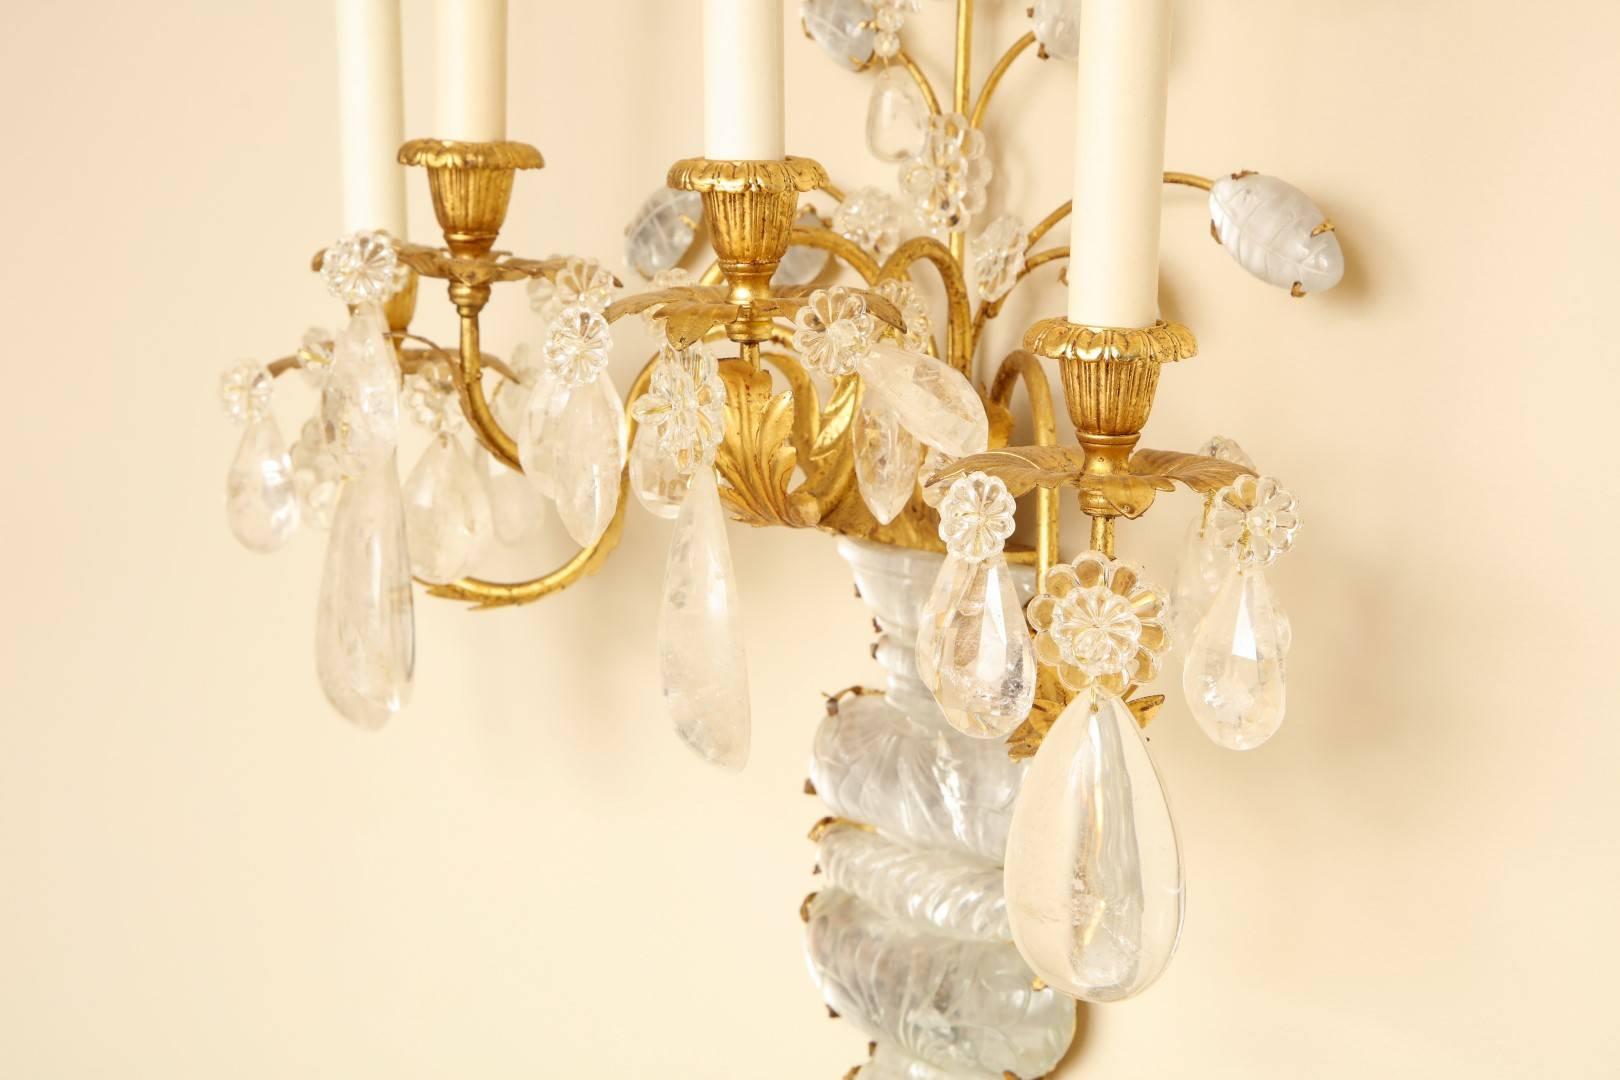 Pair of New Four-Light Rock Crystal Sconces  1